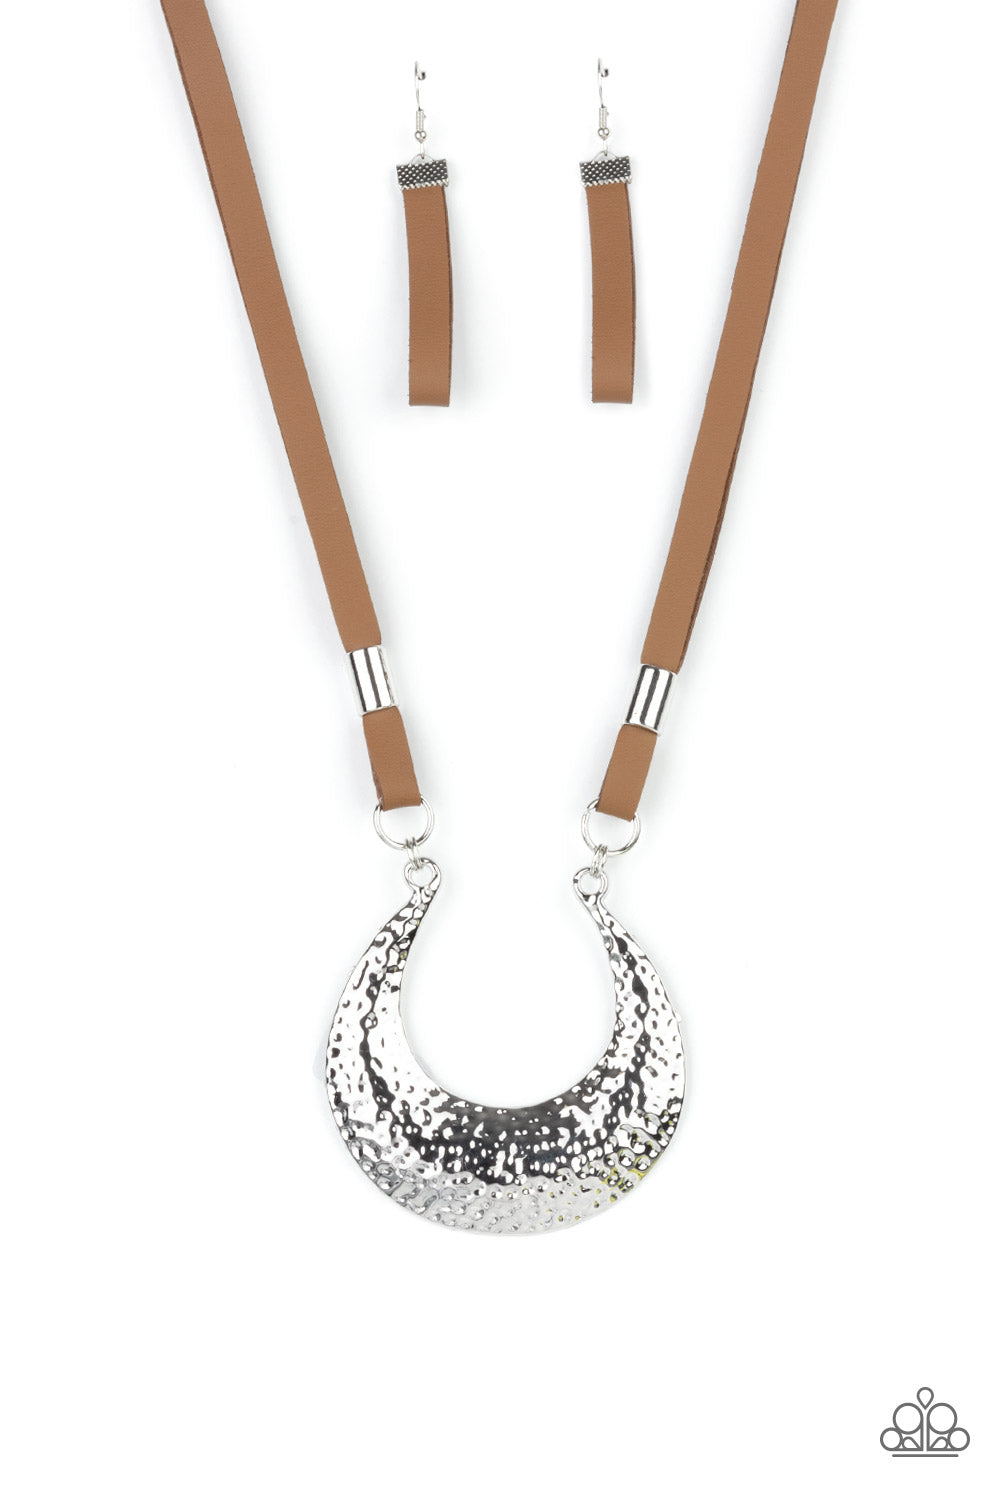 shiny silver beads, strips of brown leather link to an oversized half moon pendant that is hammered in a blinding silver finish